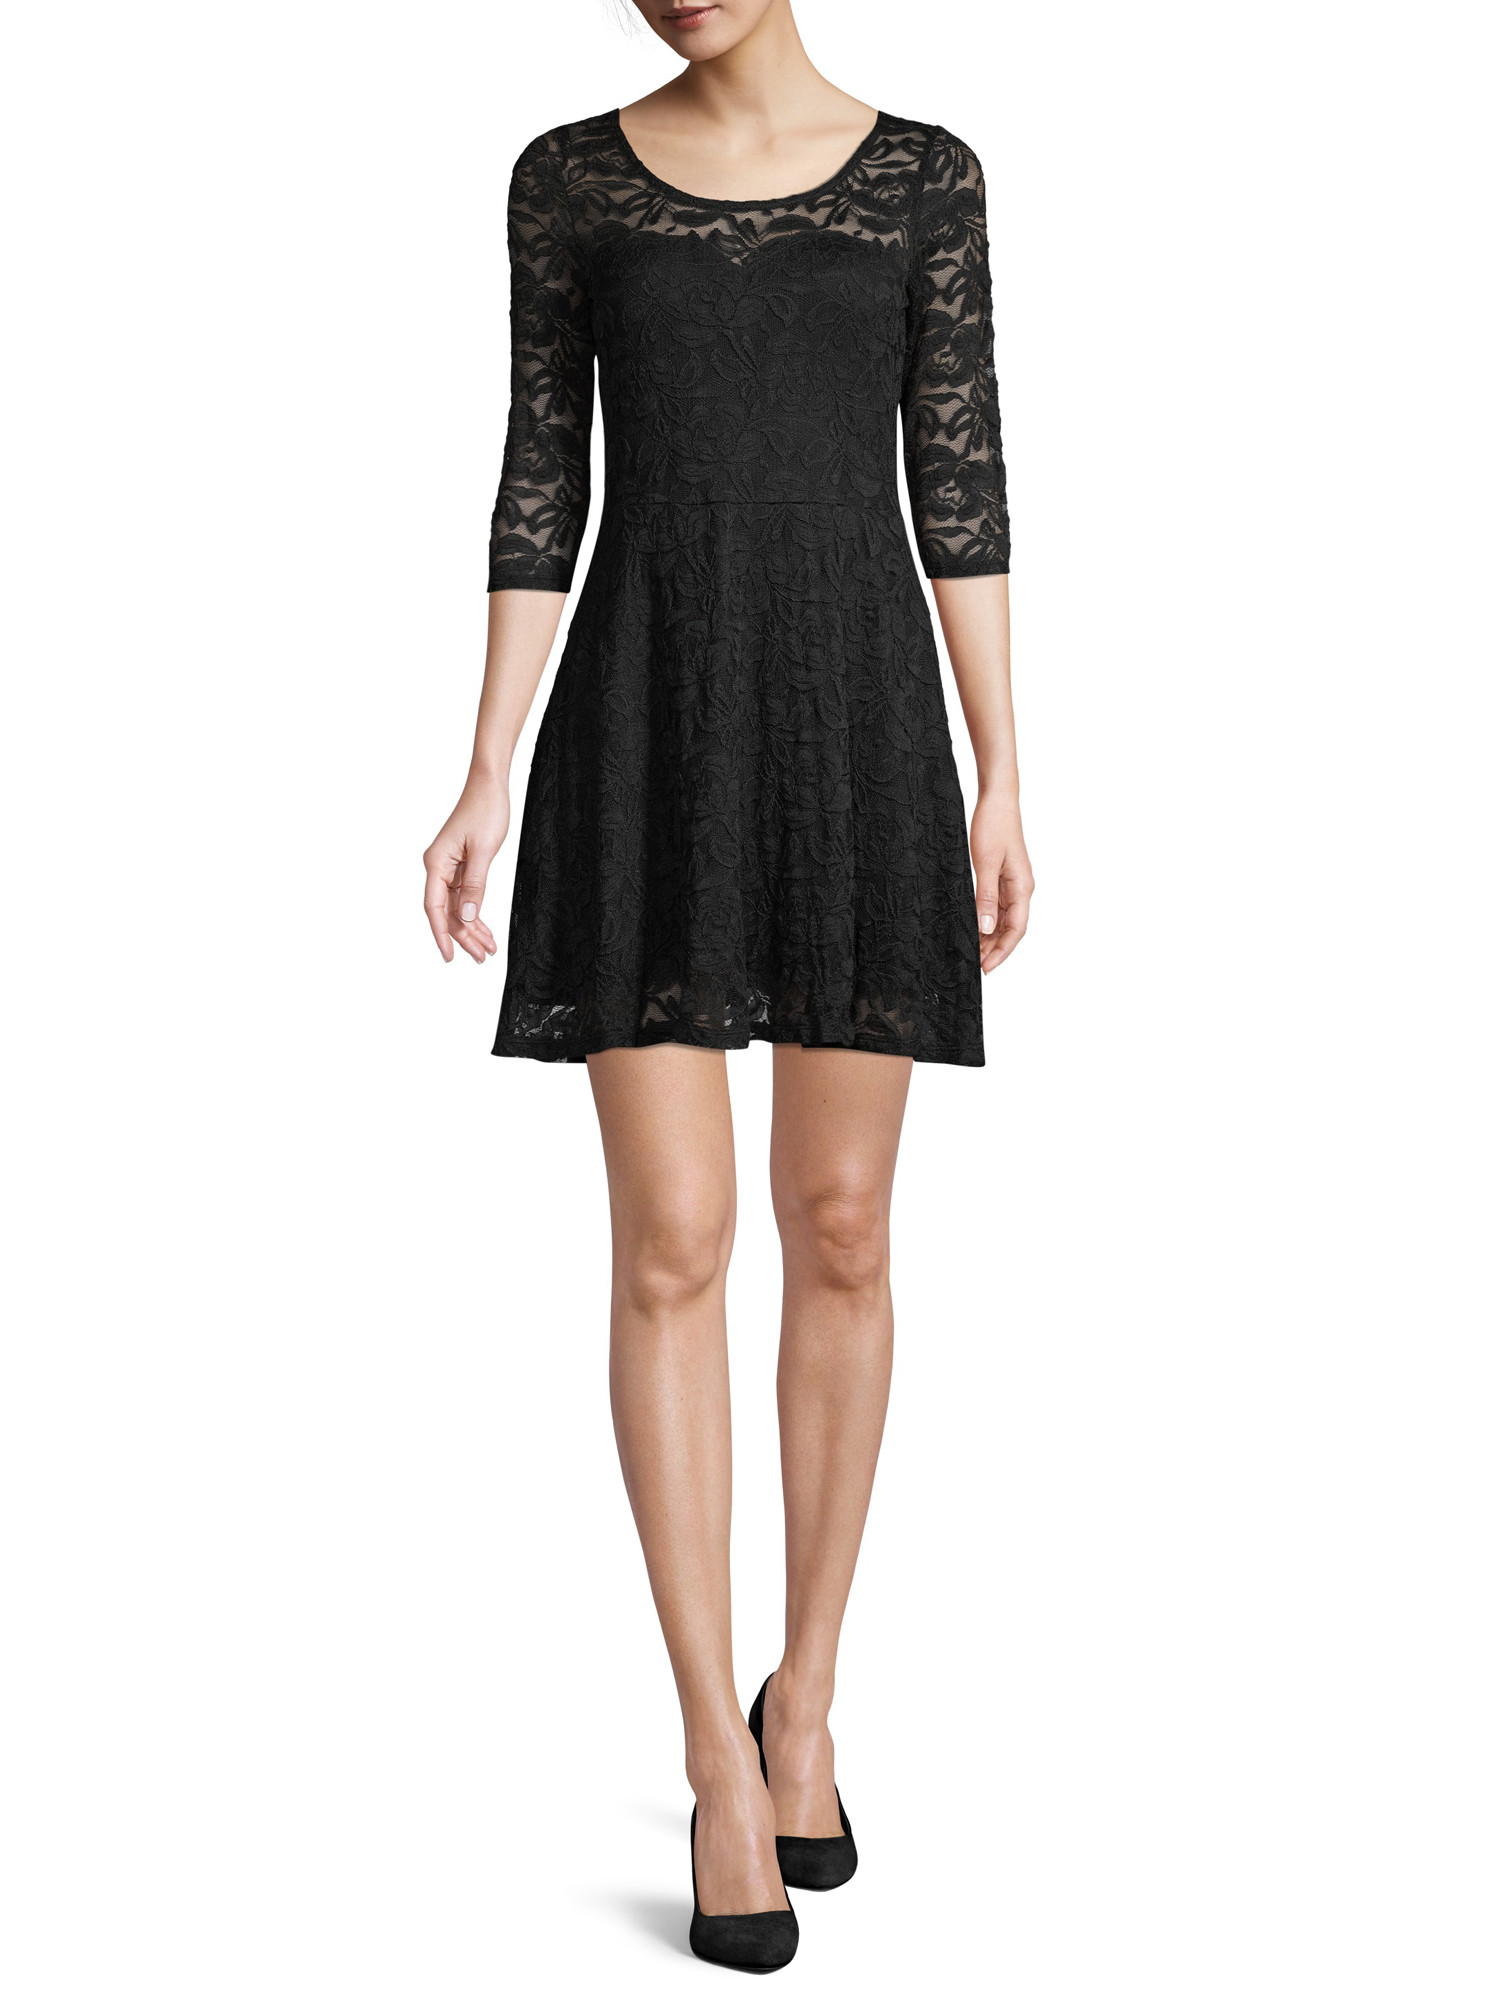 MATERIAL GIRL Womens Black Lace 3/4 Sleeve Jewel Neck Mini Party Fit + Flare Dress XXS